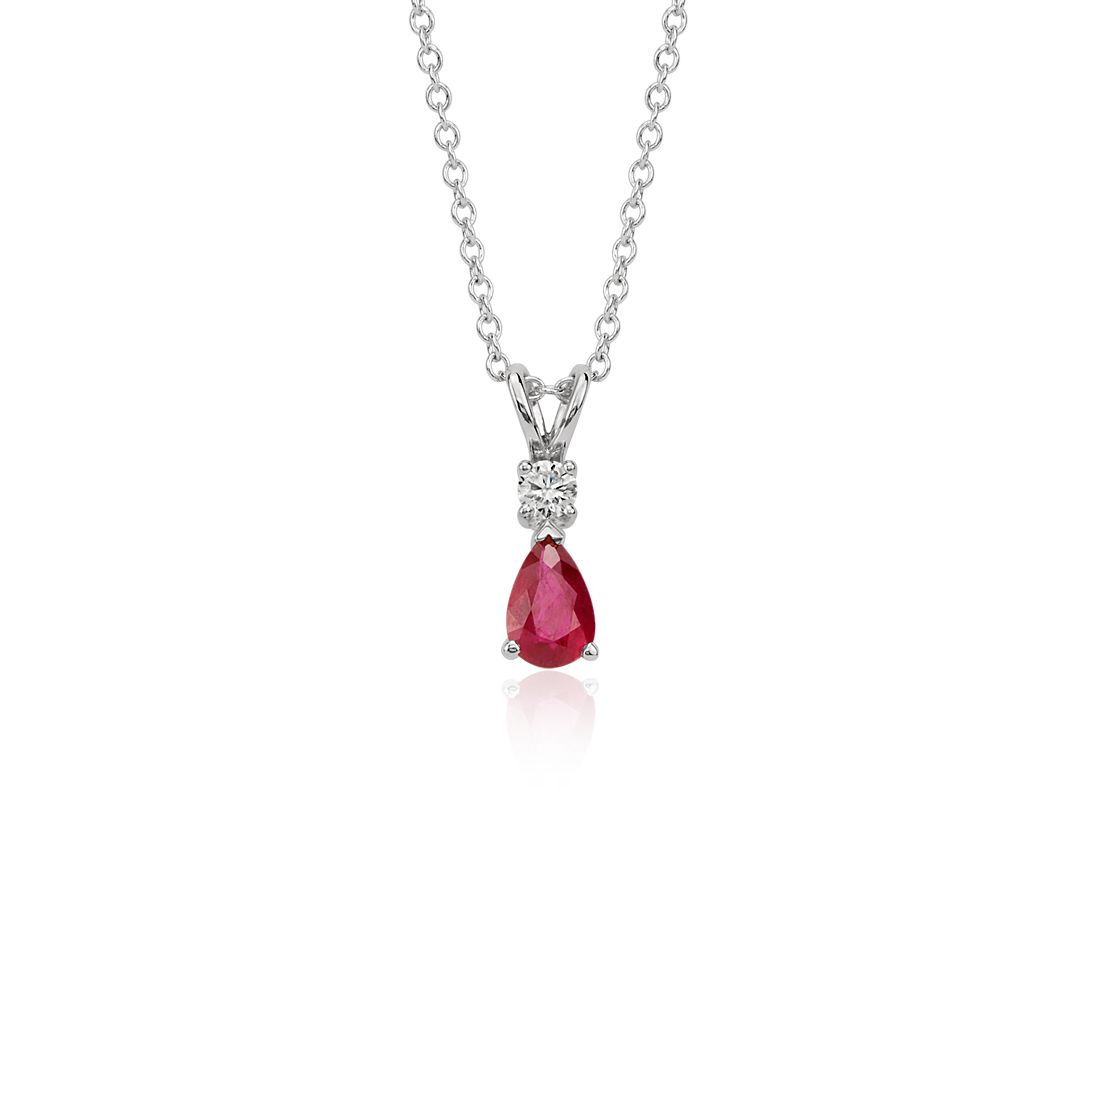 Details about   4.53 CTW 14K Solid White gold fine Necklace 16" genuine pearl Ruby Diamond 